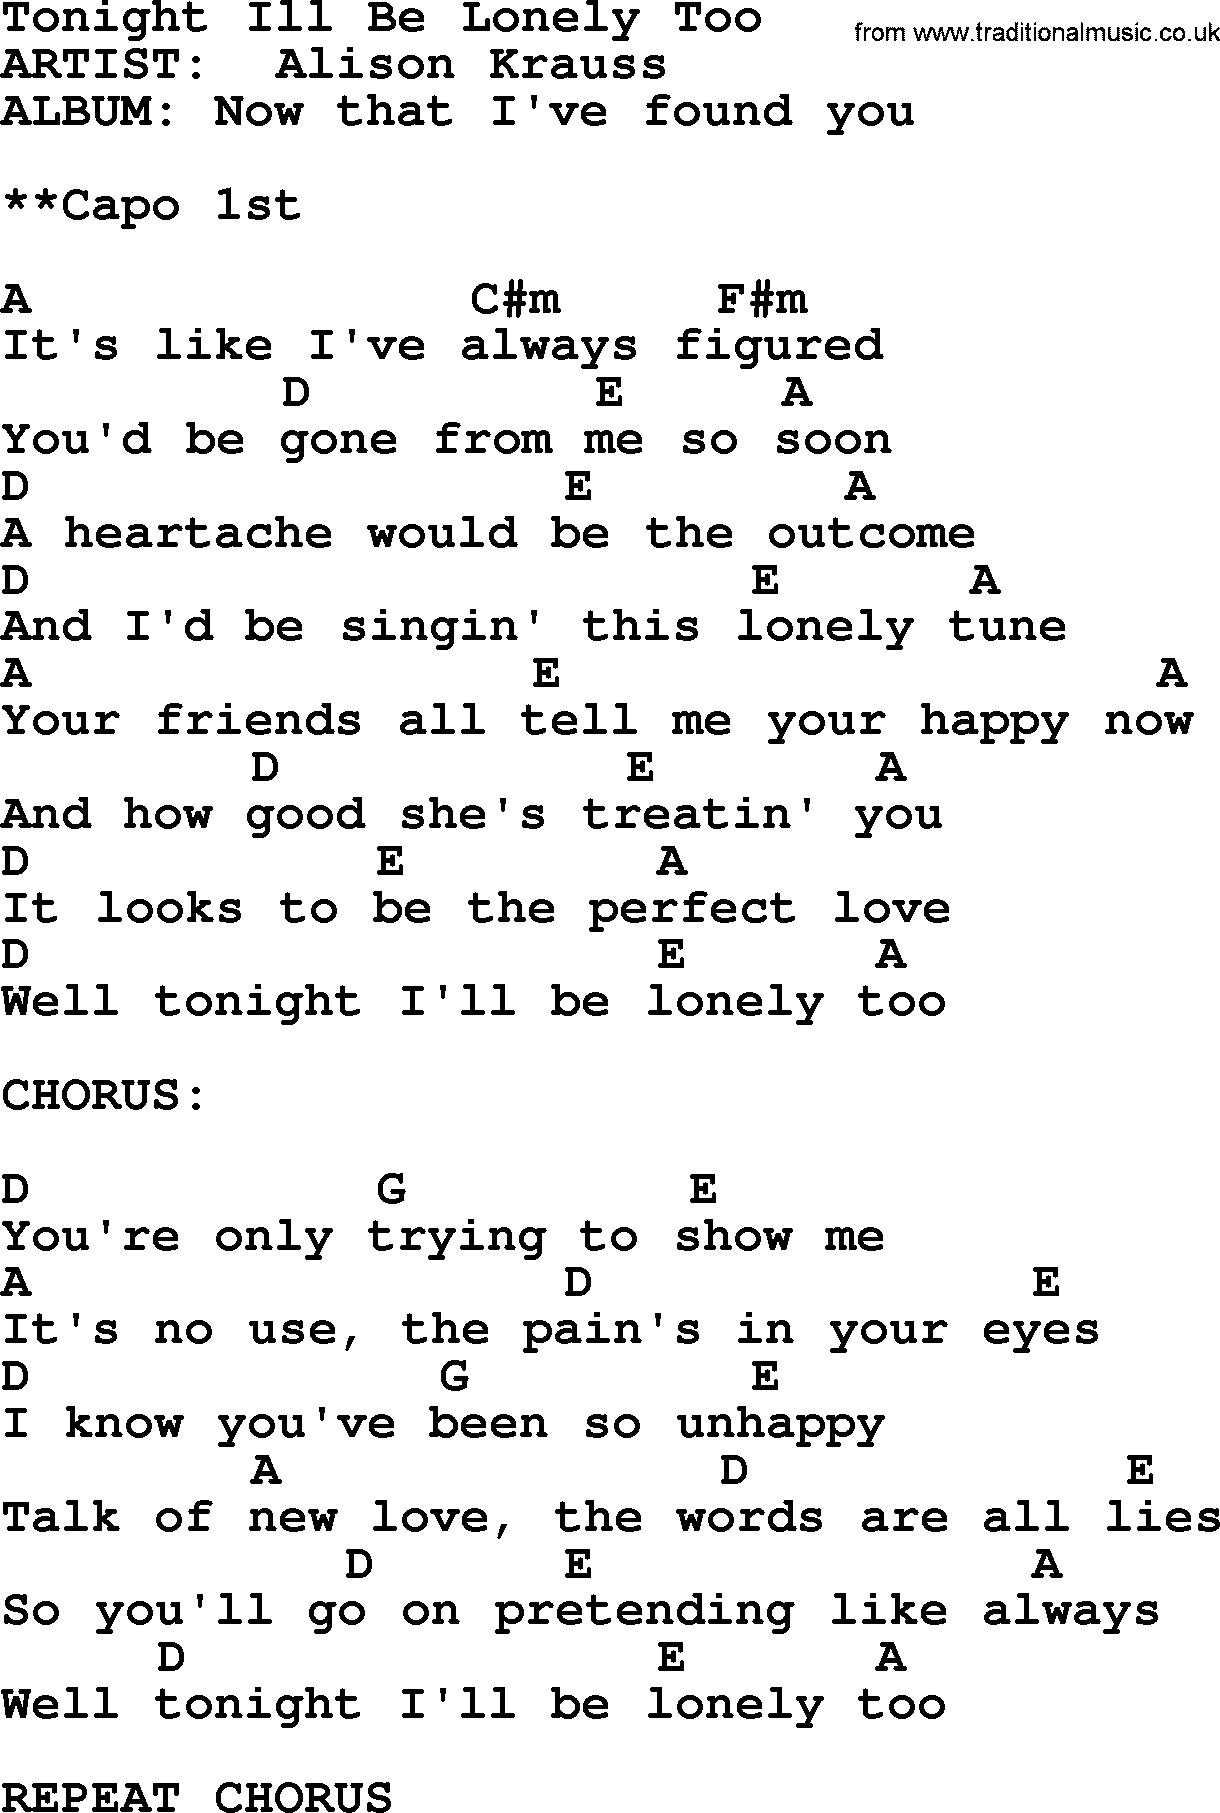 Bluegrass song: Tonight Ill Be Lonely Too, lyrics and chords